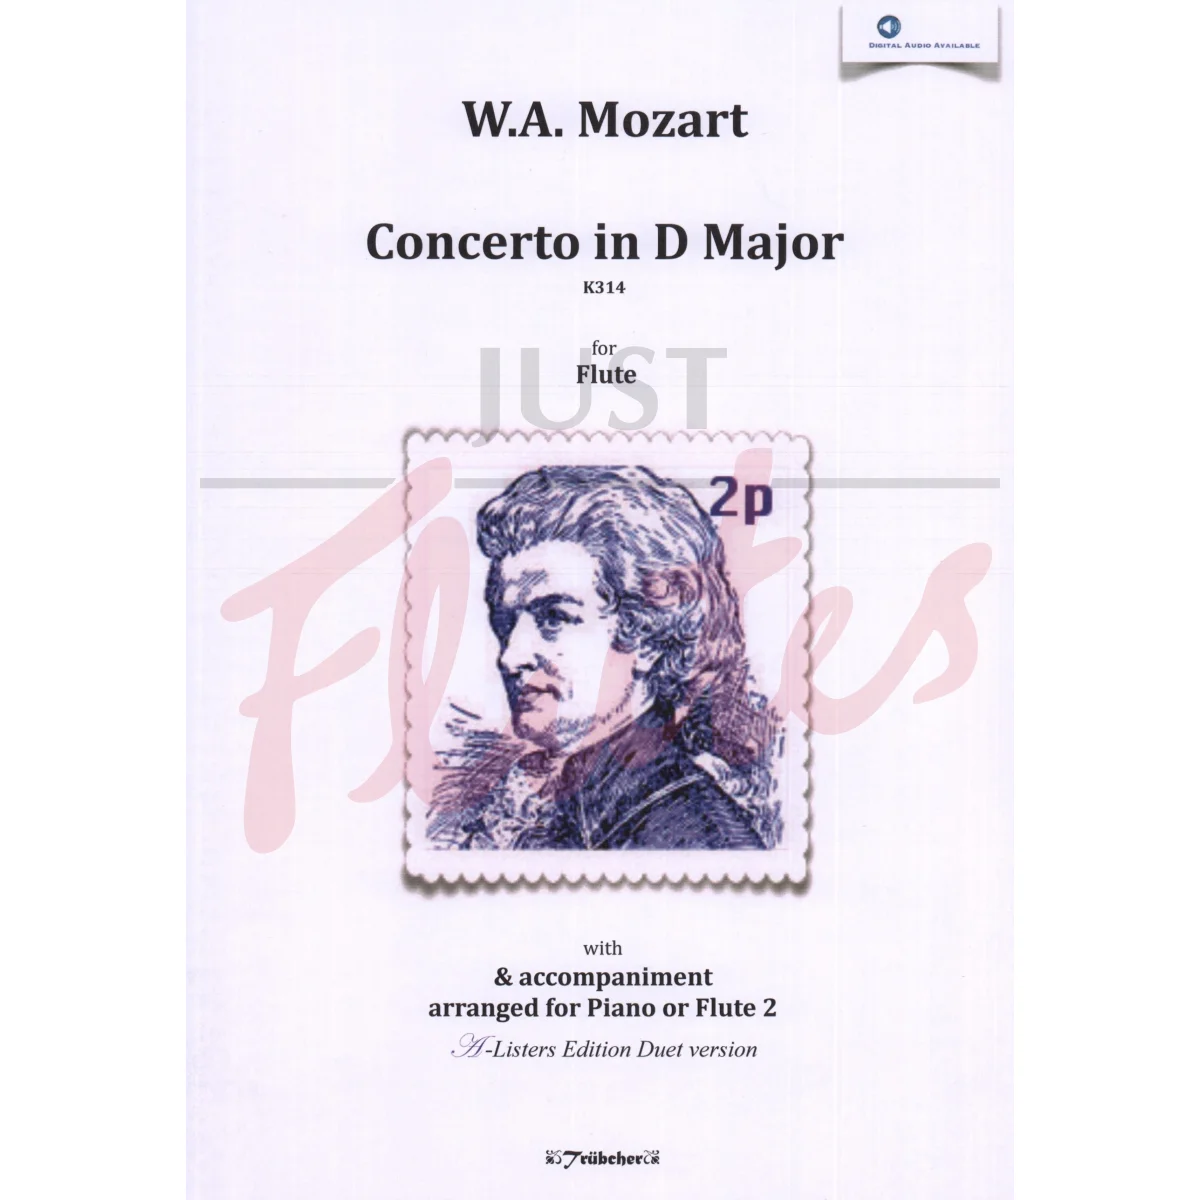 Concerto No. 2 in D major for Flute and Piano (optional Second Flute)